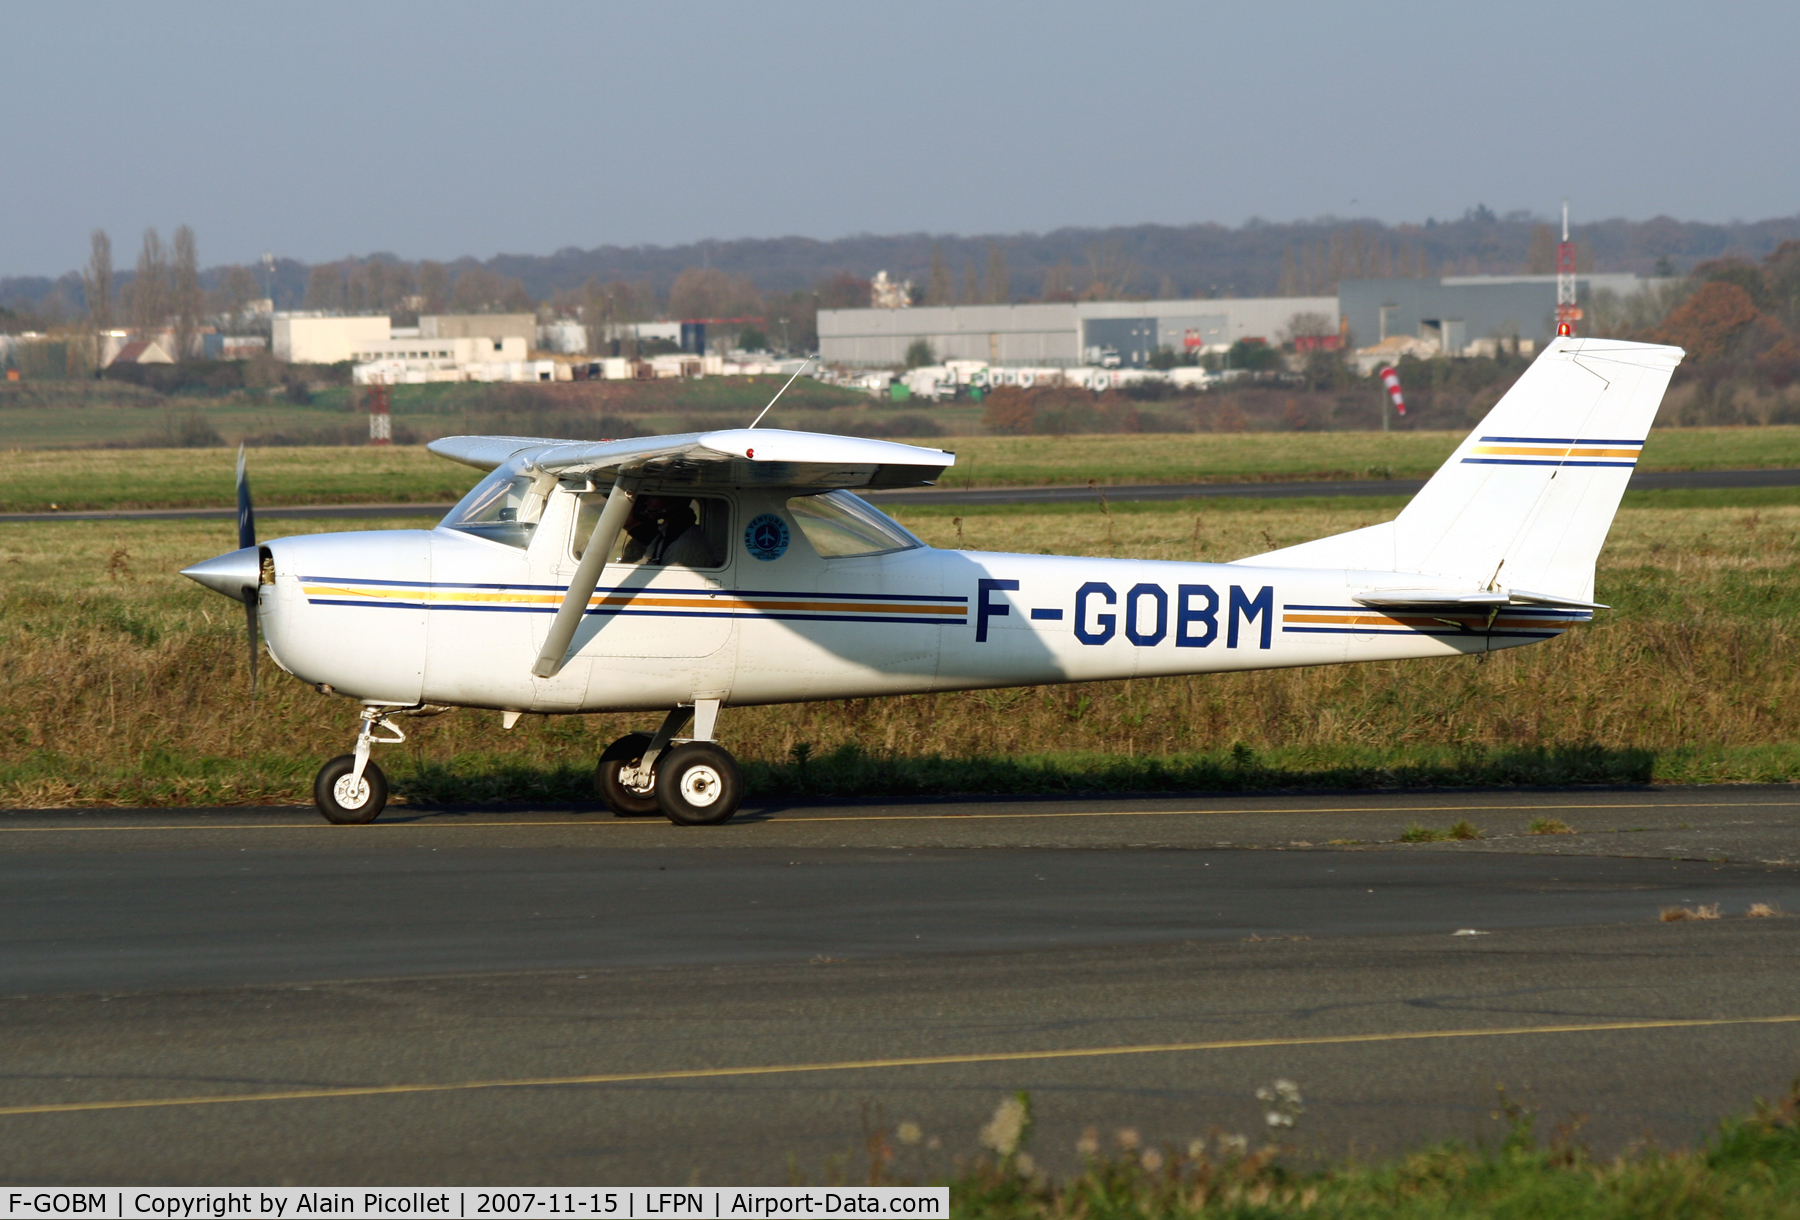 F-GOBM, Reims F150G C/N 0215, taxing on runway